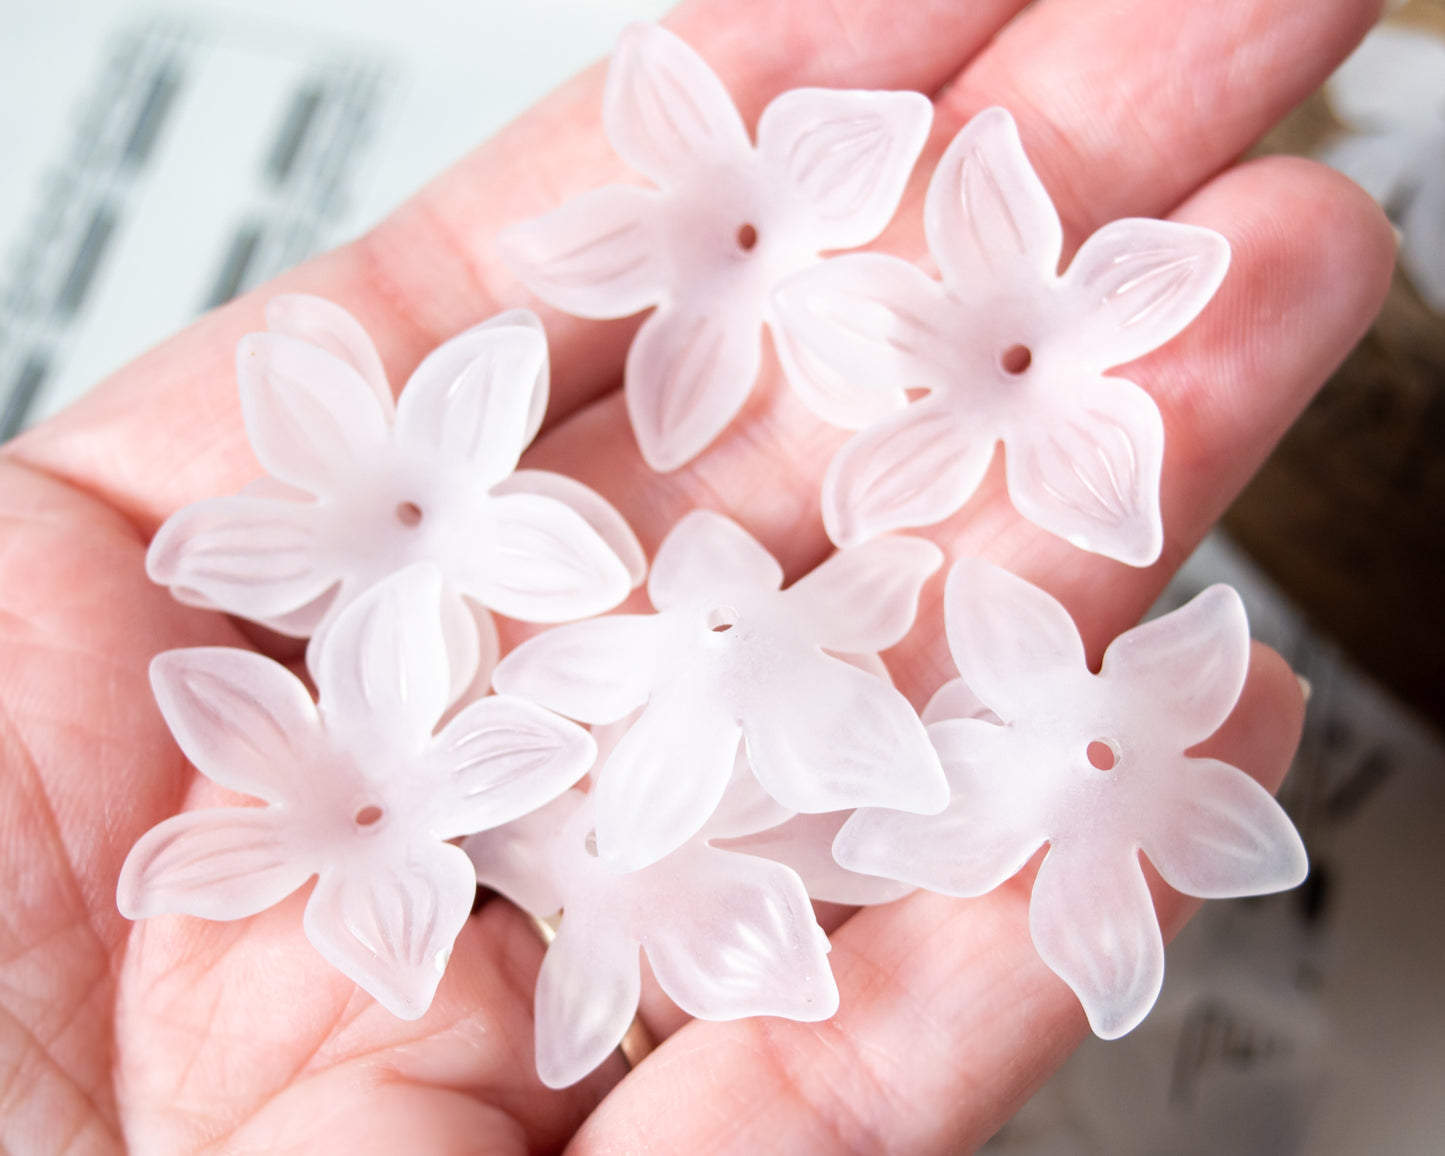 7x28mm White Flower Beads in Frosted Acrylic